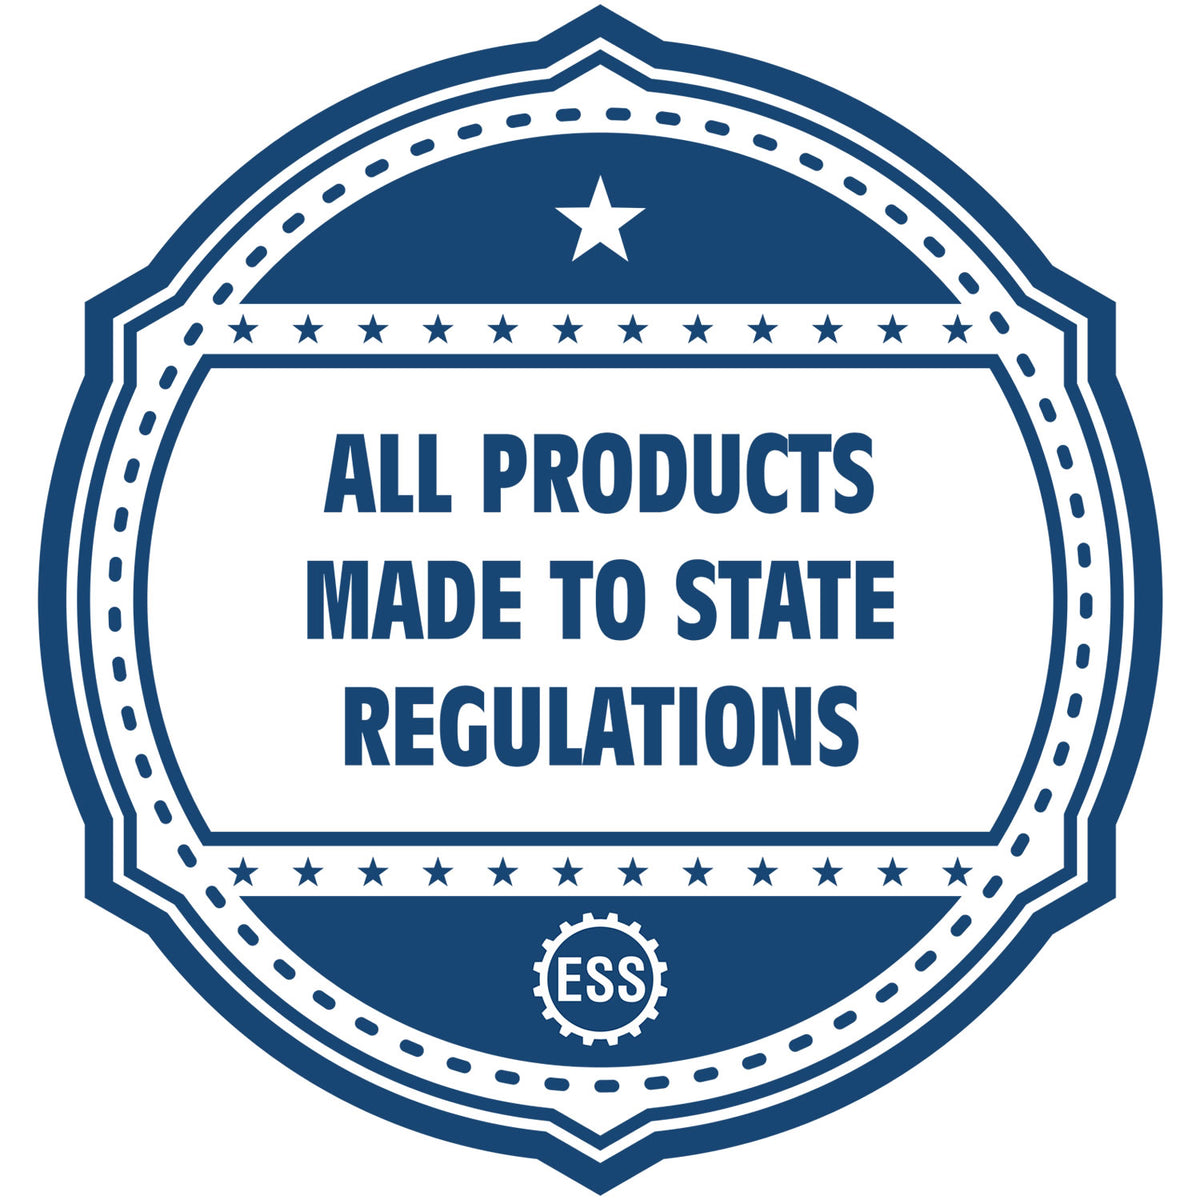 An icon or badge element for the Digital Delaware PE Stamp and Electronic Seal for Delaware Engineer showing that this product is made in compliance with state regulations.